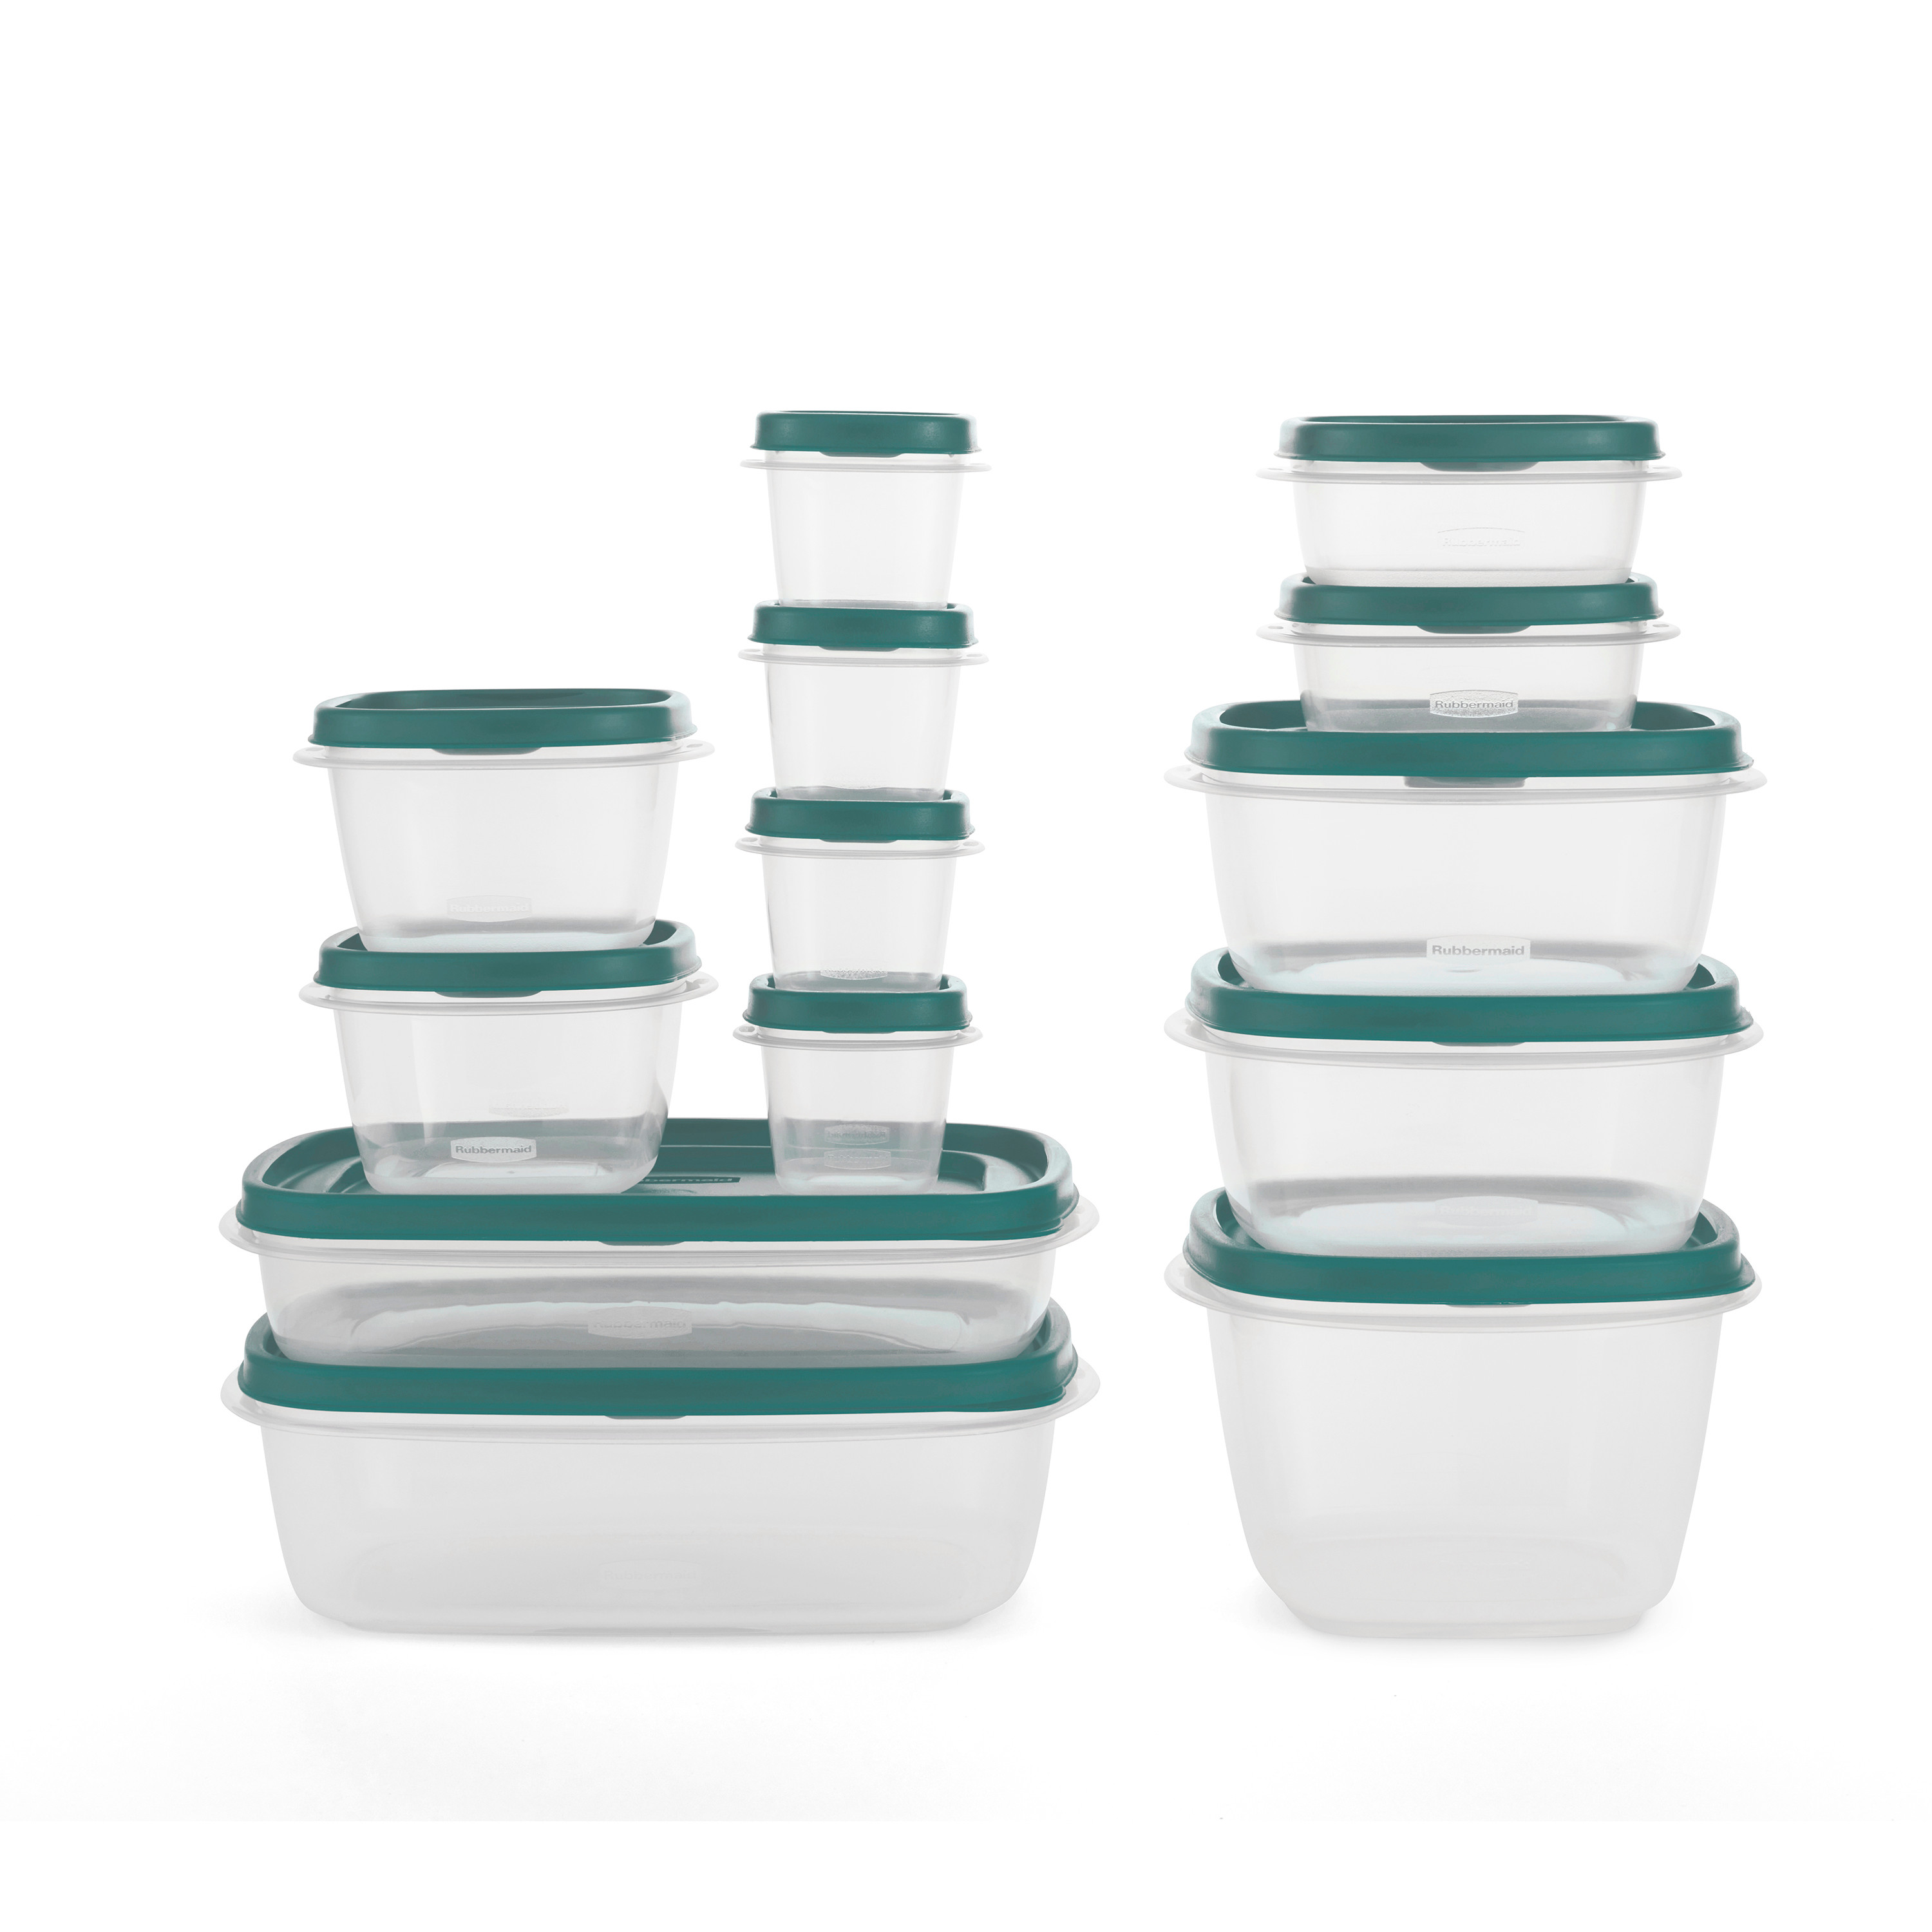 Rubbermaid EasyFindLids 26 Piece Plastic Food Storage Container Set with Vents, (39.5 Cup), Blue Spruce - image 1 of 8